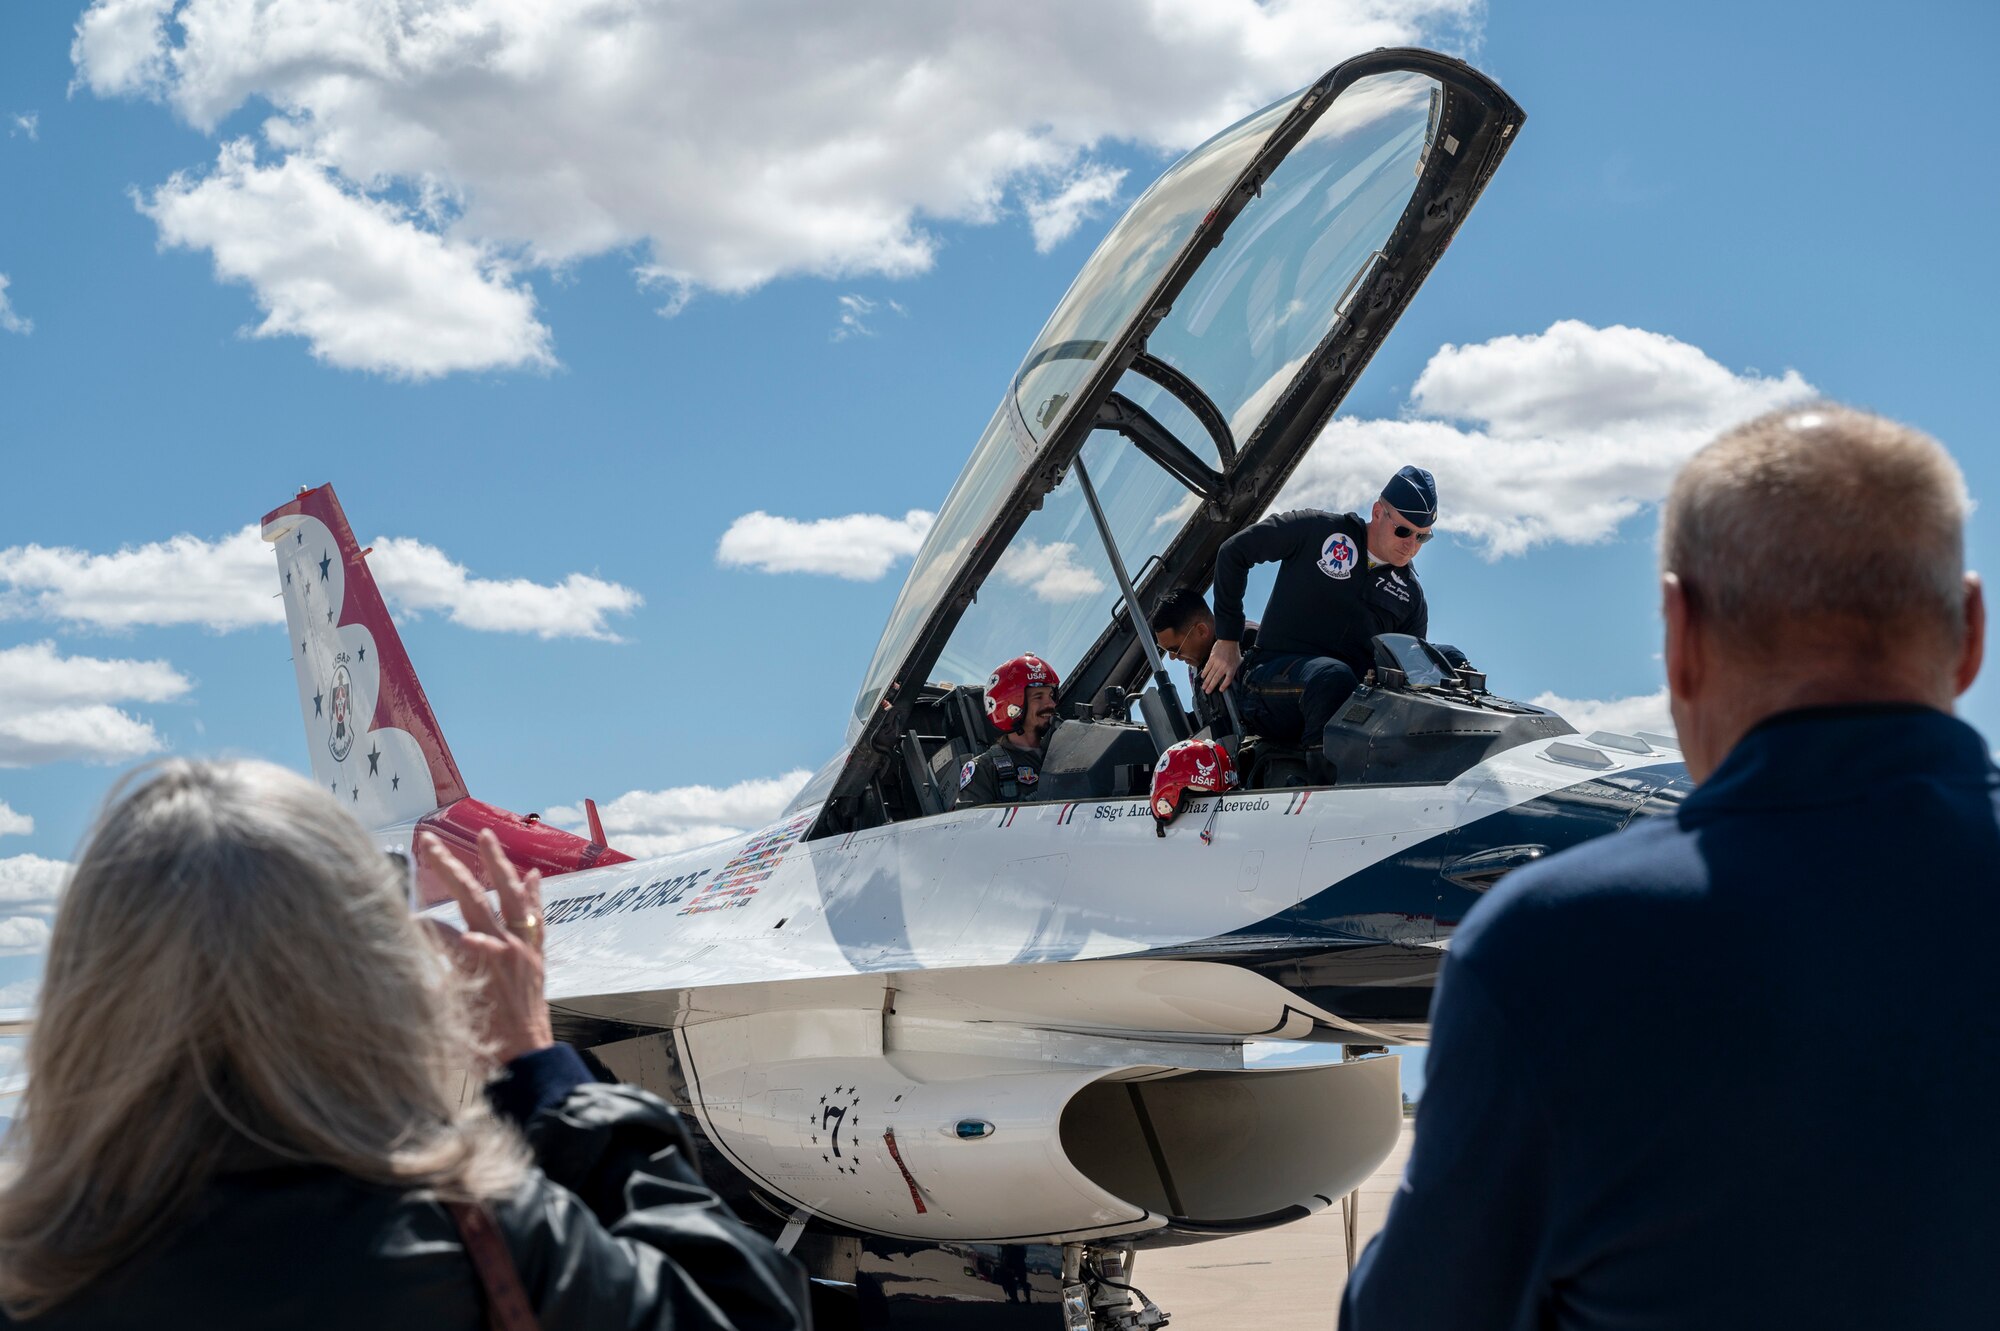 Photo of two people boarding a two-seater fighter jet with two people watching in the foreground.